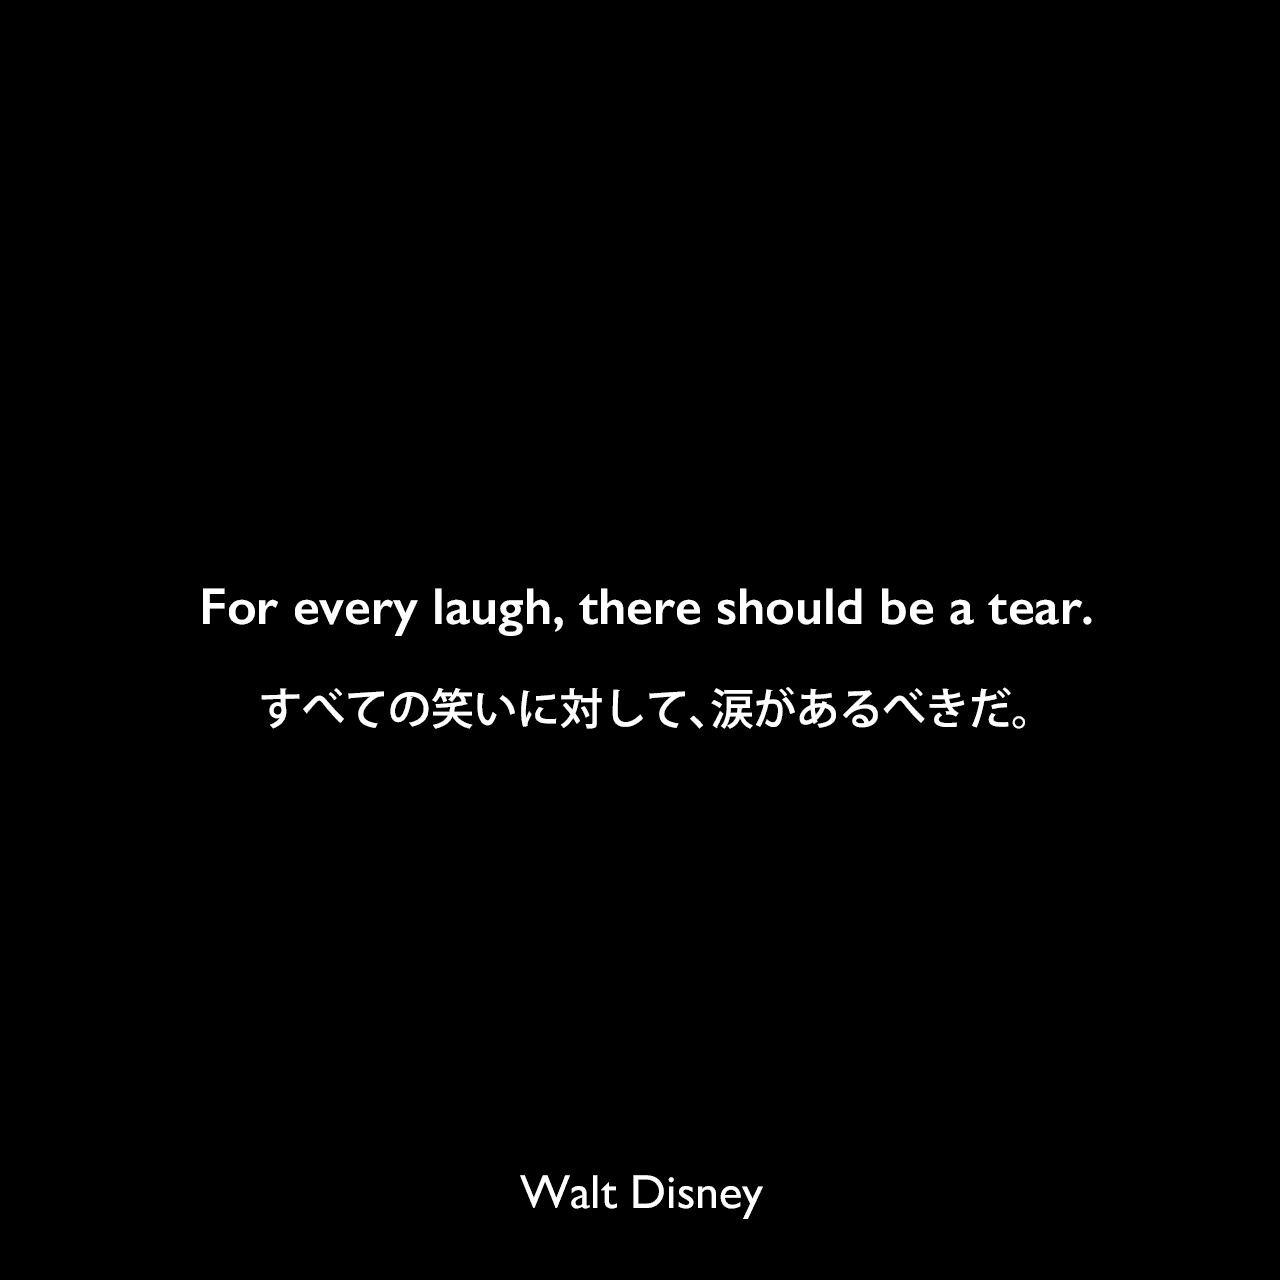 For every laugh, there should be a tear.すべての笑いに対して、涙があるべきだ。- The New York Times(2001年11月)よりWalt Disney